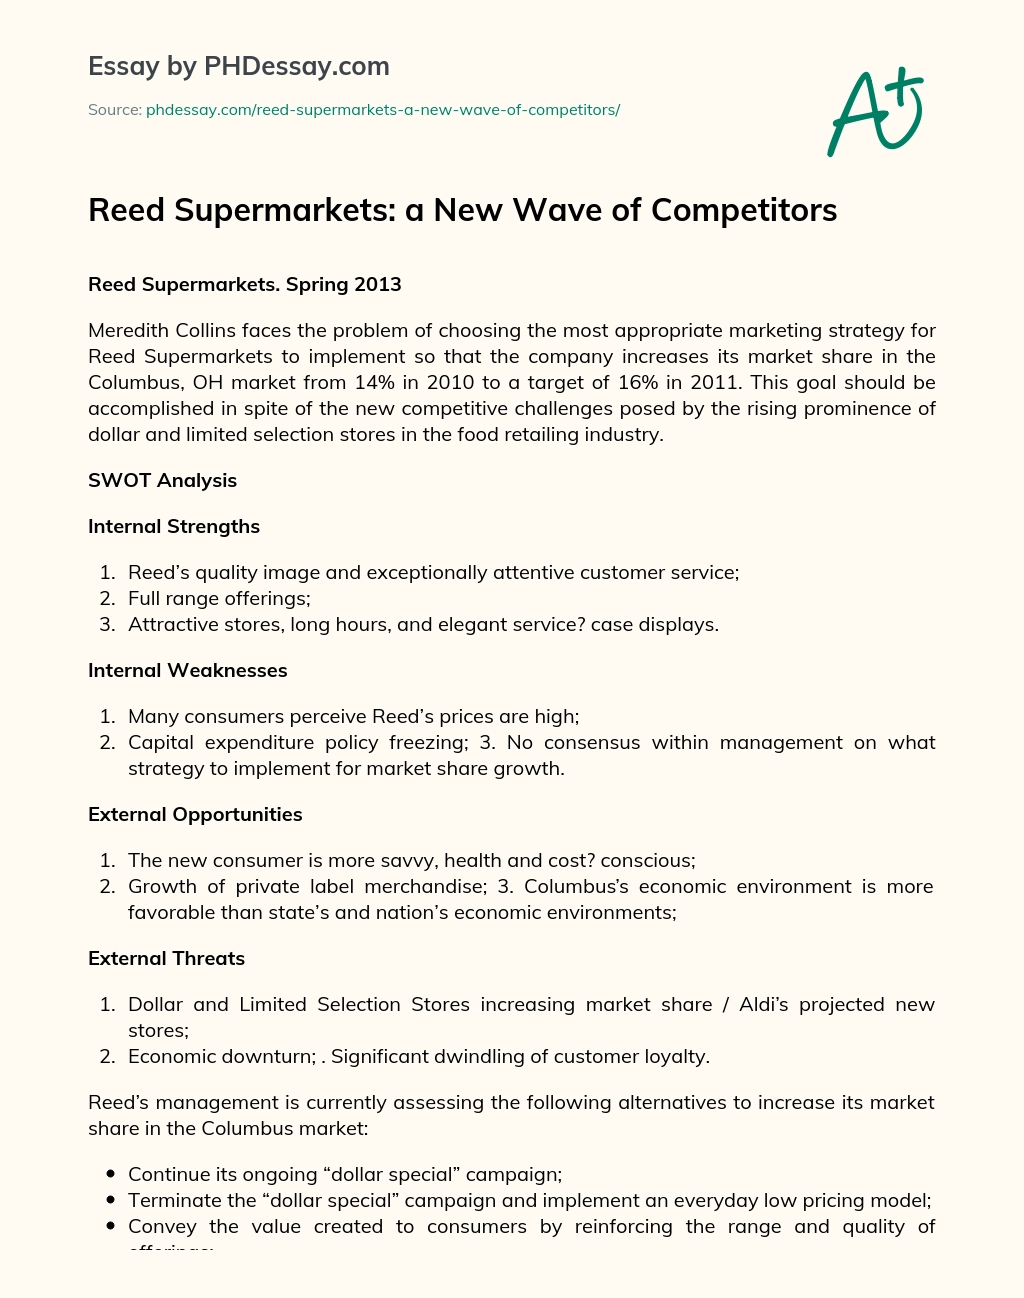 Reed Supermarkets: a New Wave of Competitors essay